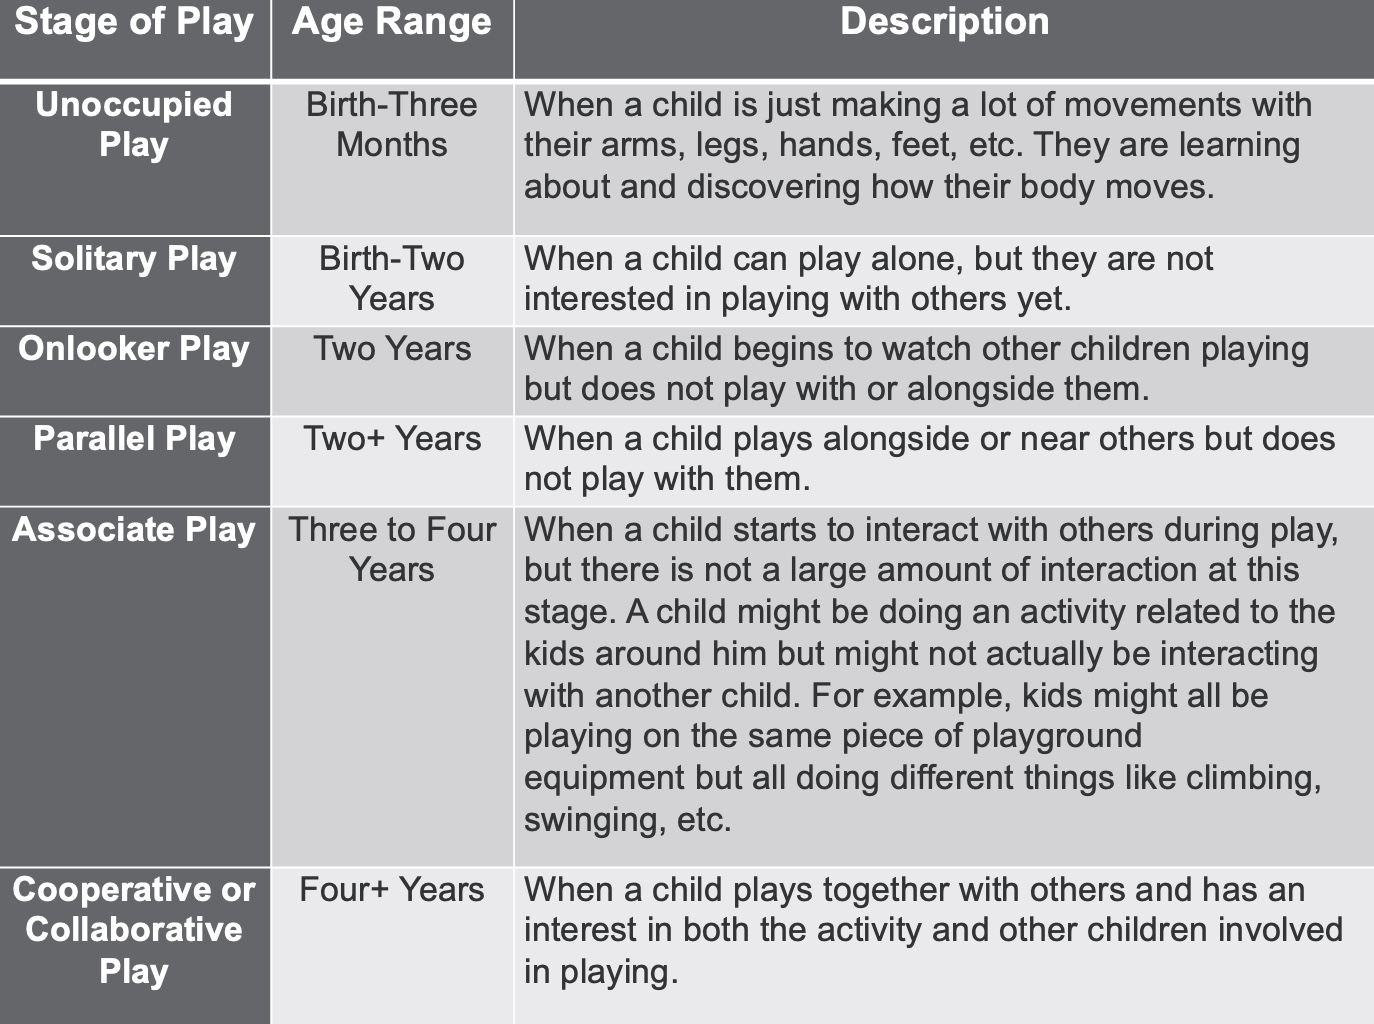 Stages of play and descriptions.